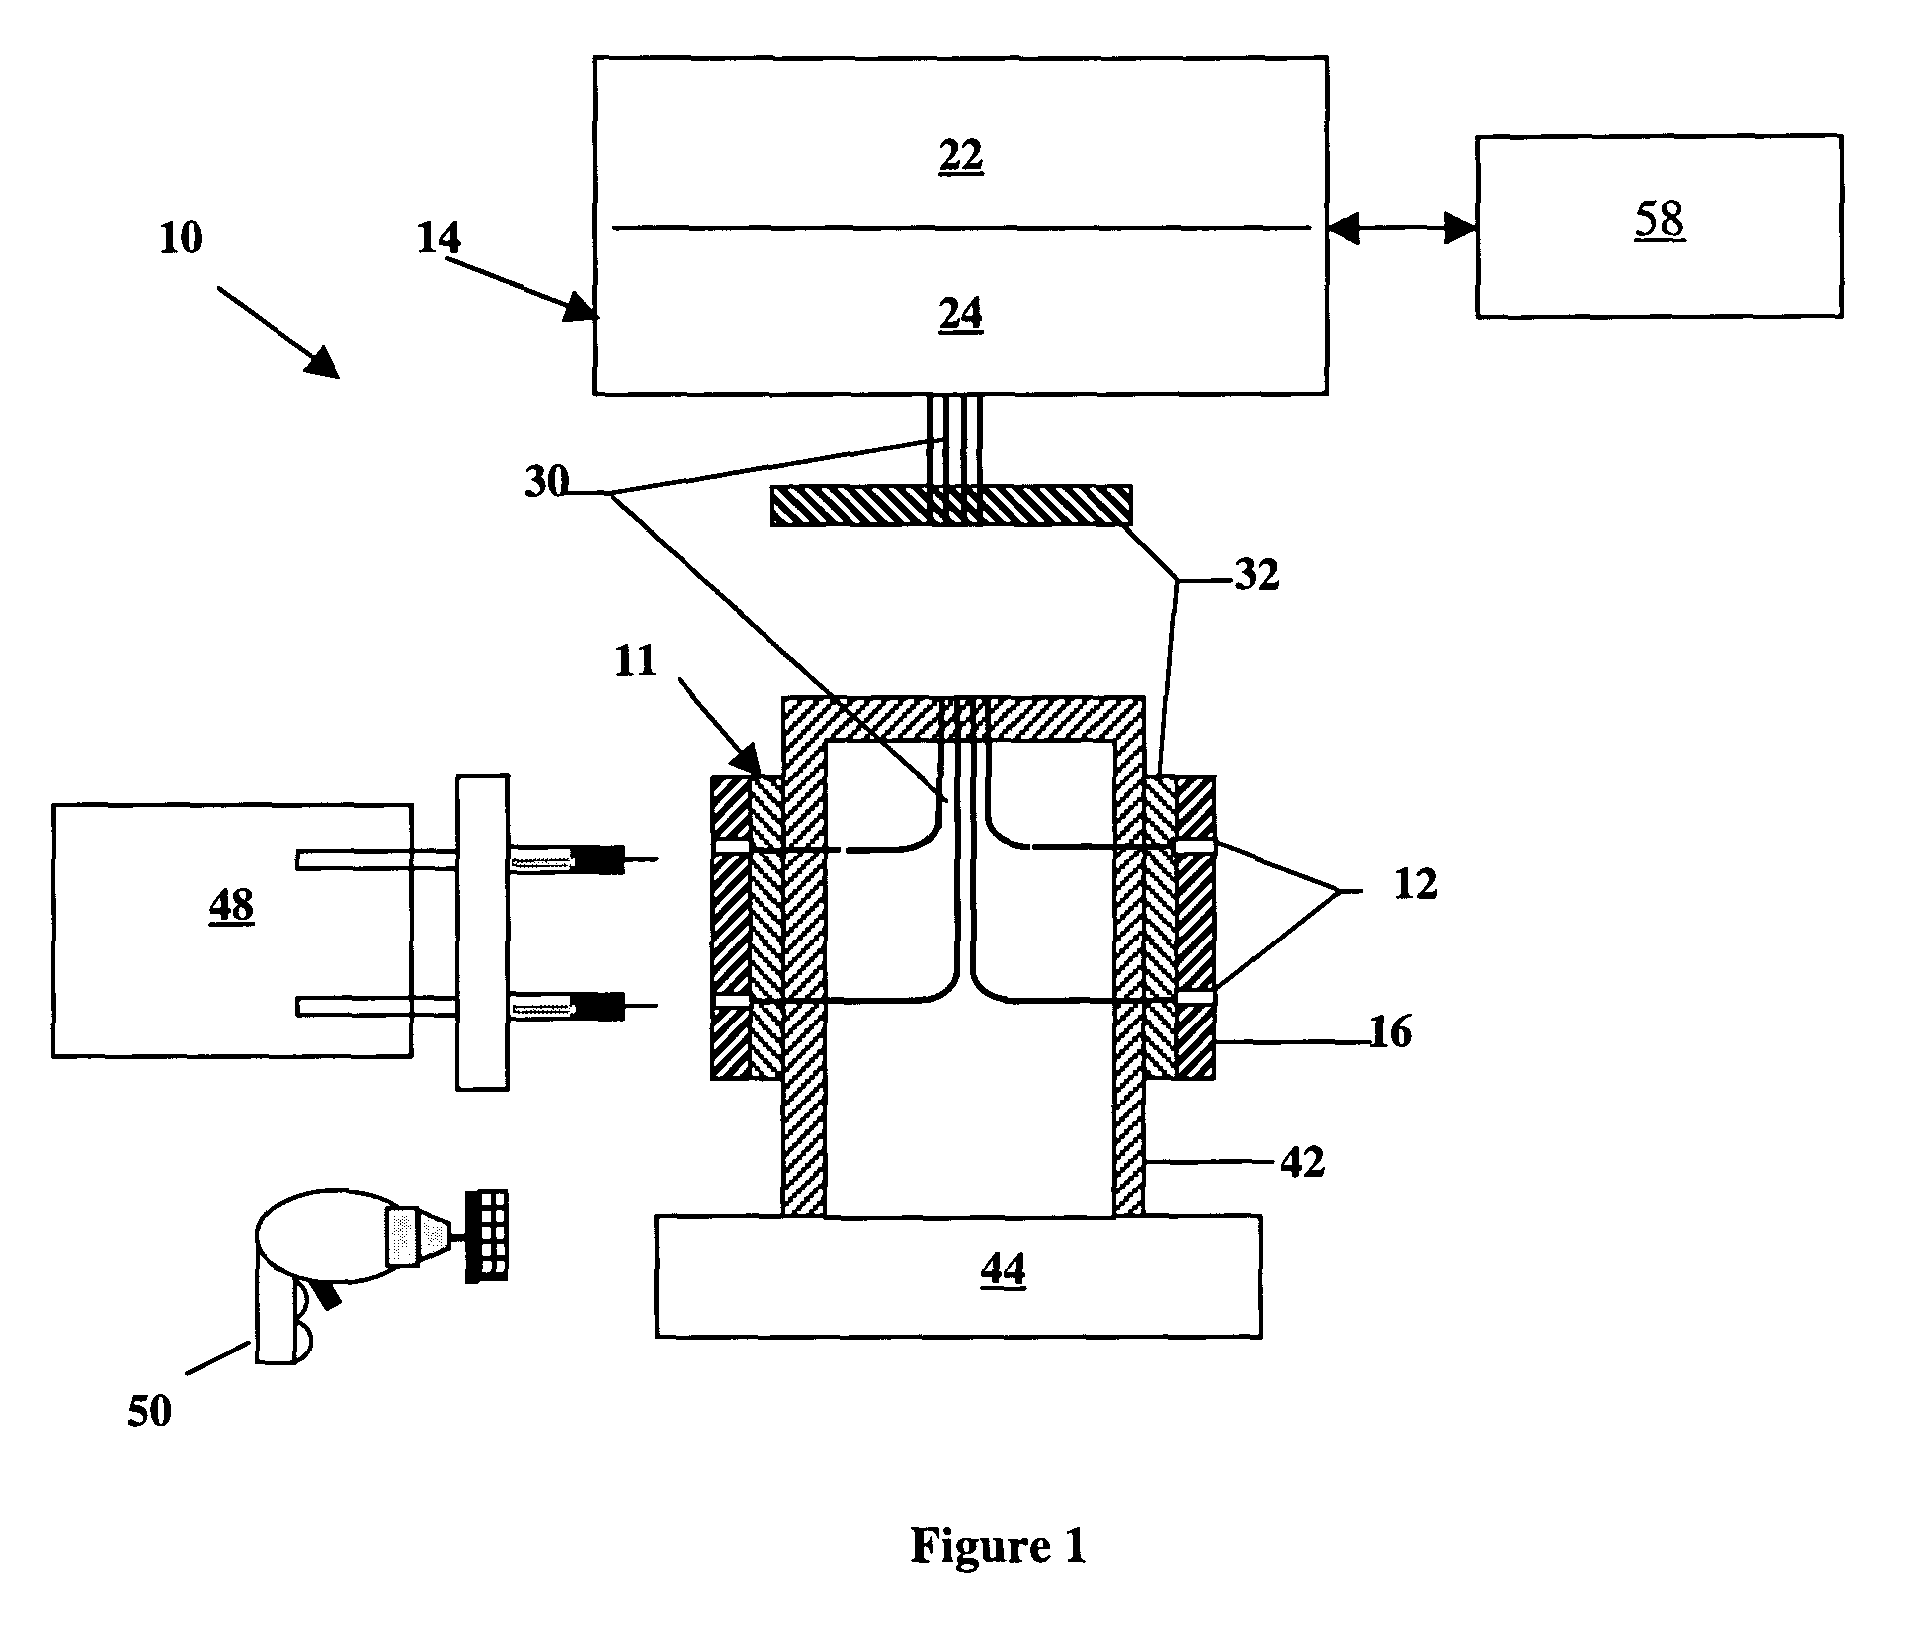 System and method for bonding and debonding a workpiece to a manufacturing fixture